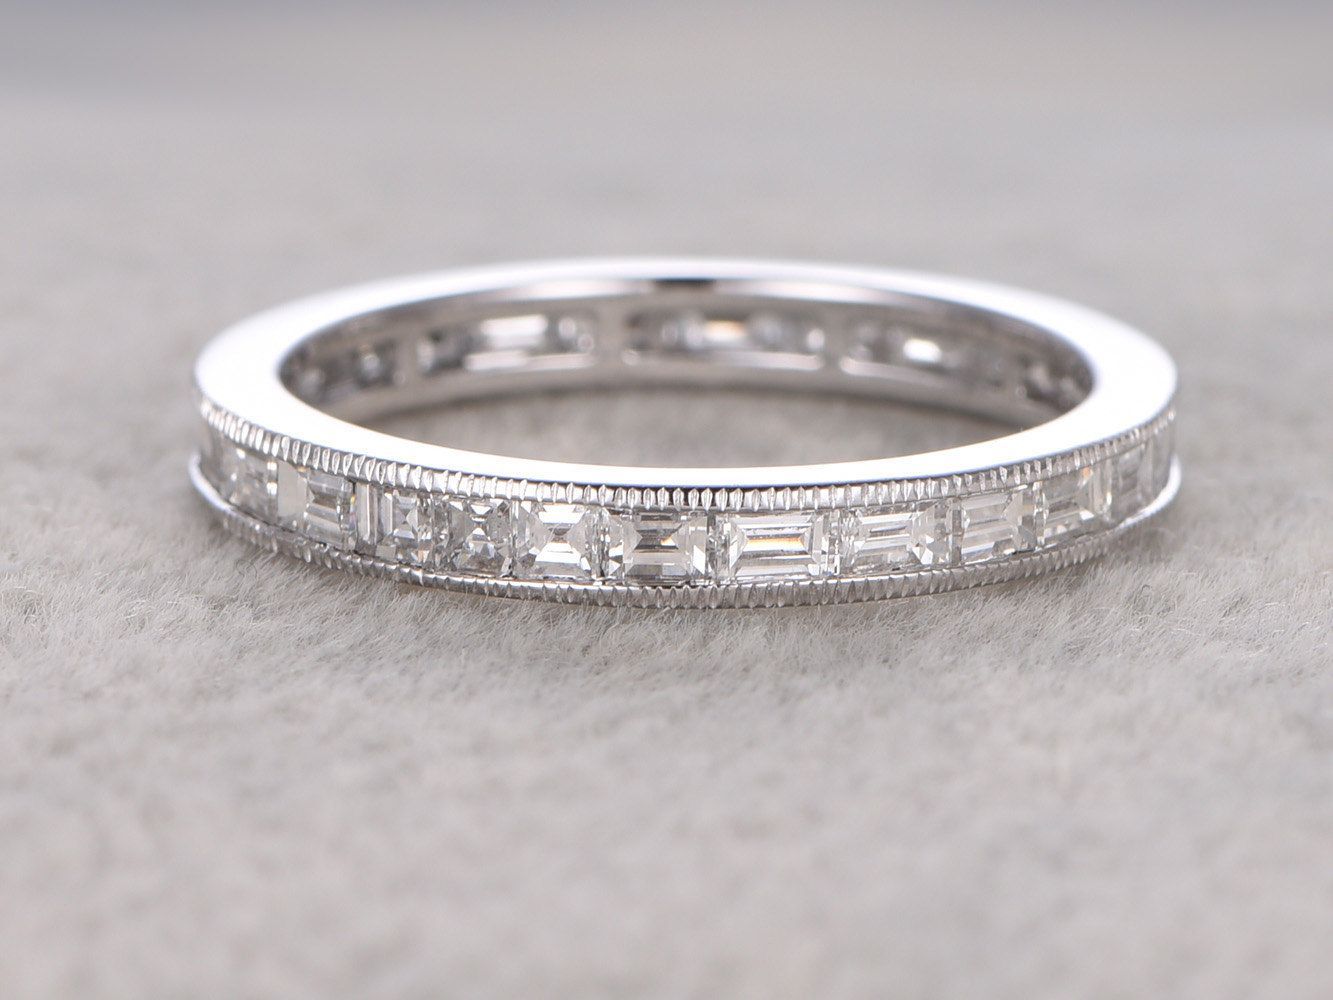 Baguette Diamond Wedding Rings For Her 14k White Gold Full Intended For Most Popular Baguette Diamond Channel Set Anniversary Bands In White Gold (View 8 of 25)